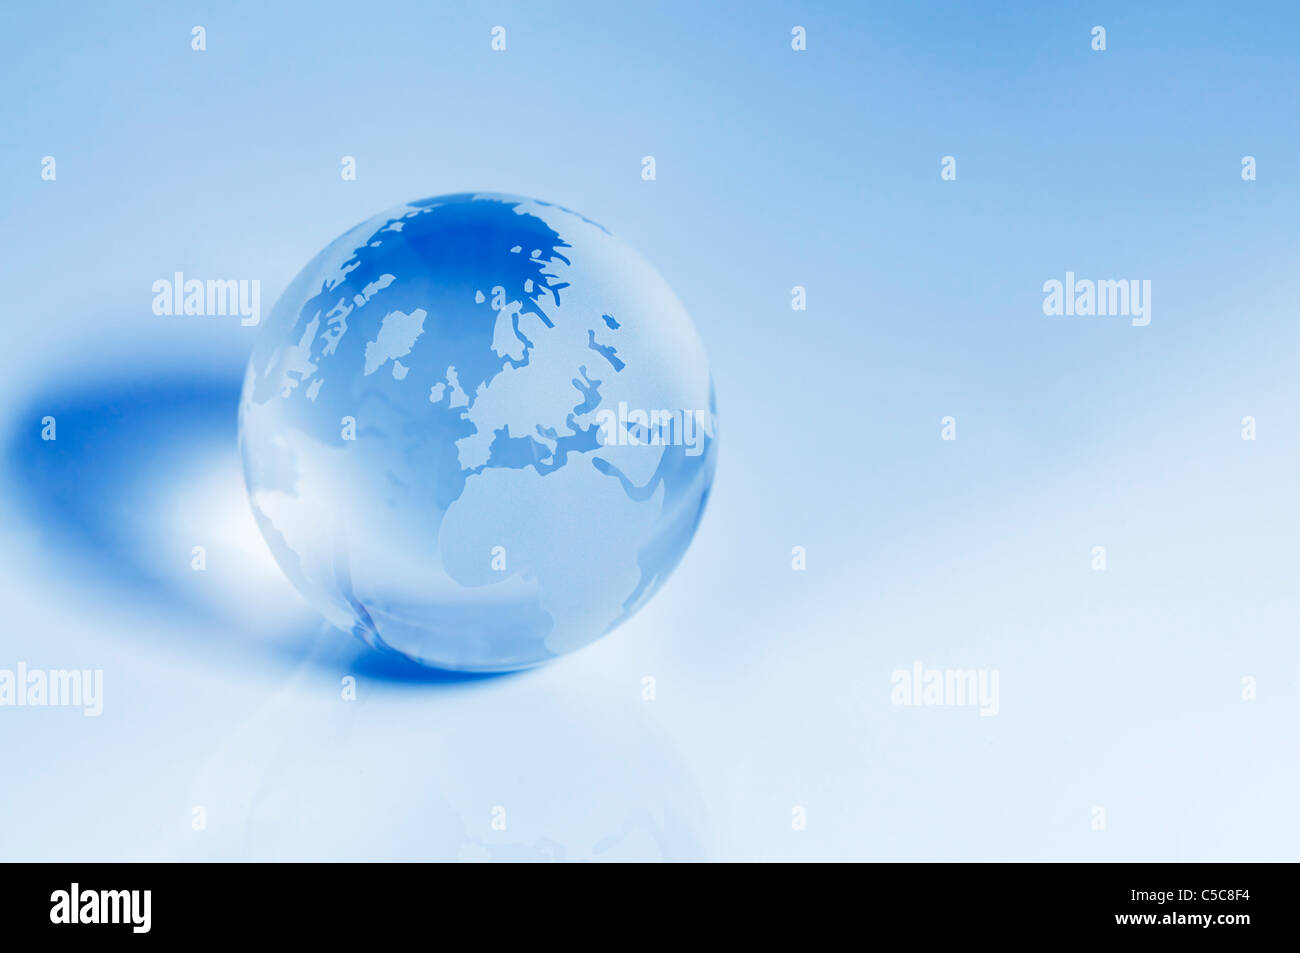 Blue crystal globe focusing on the Europe and Africa area. Stock Photo